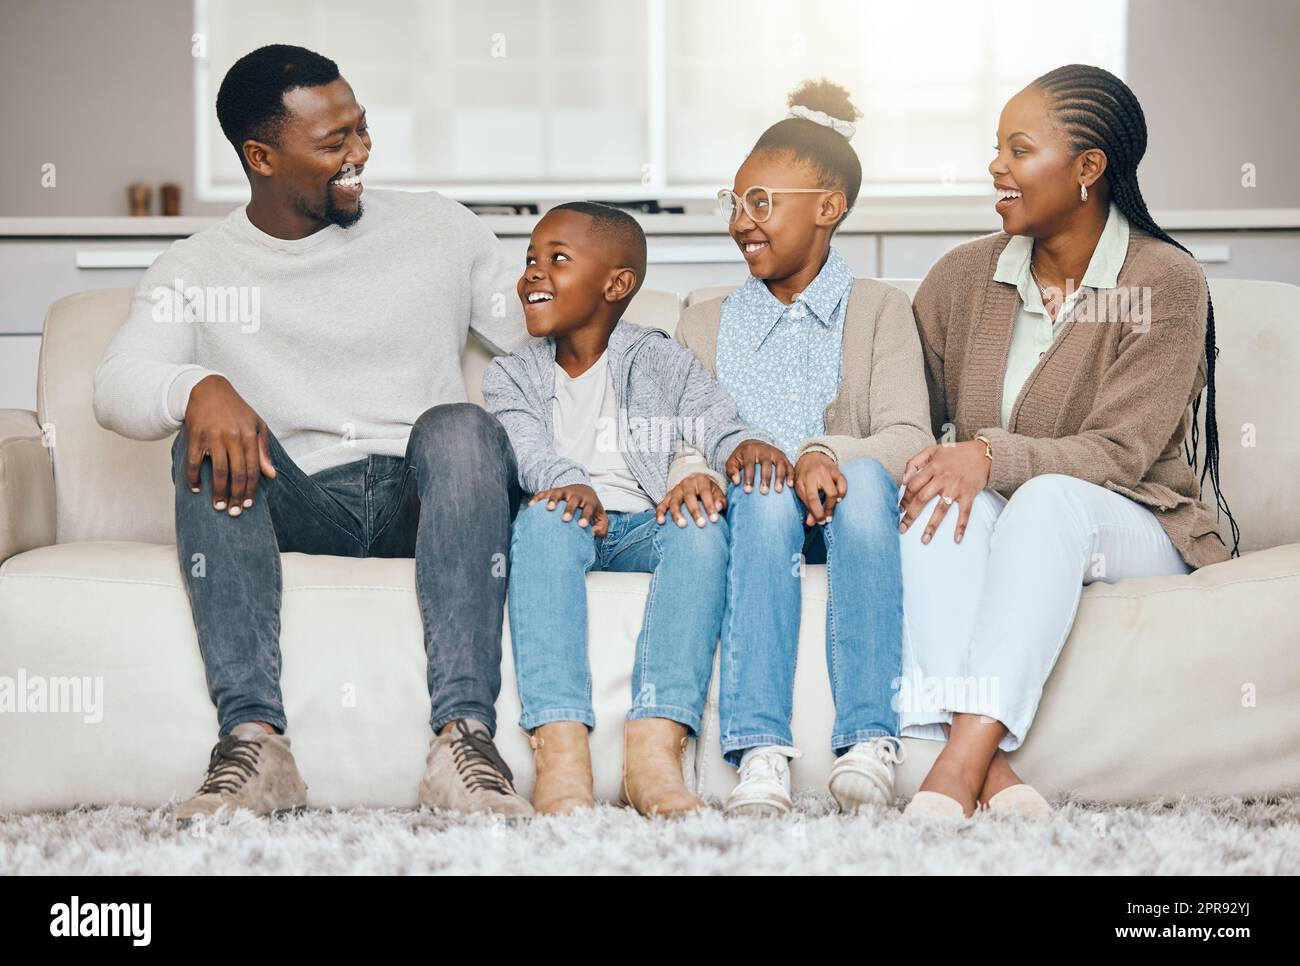 We admire him so much. a young family relaxing together at home. Stock Photo